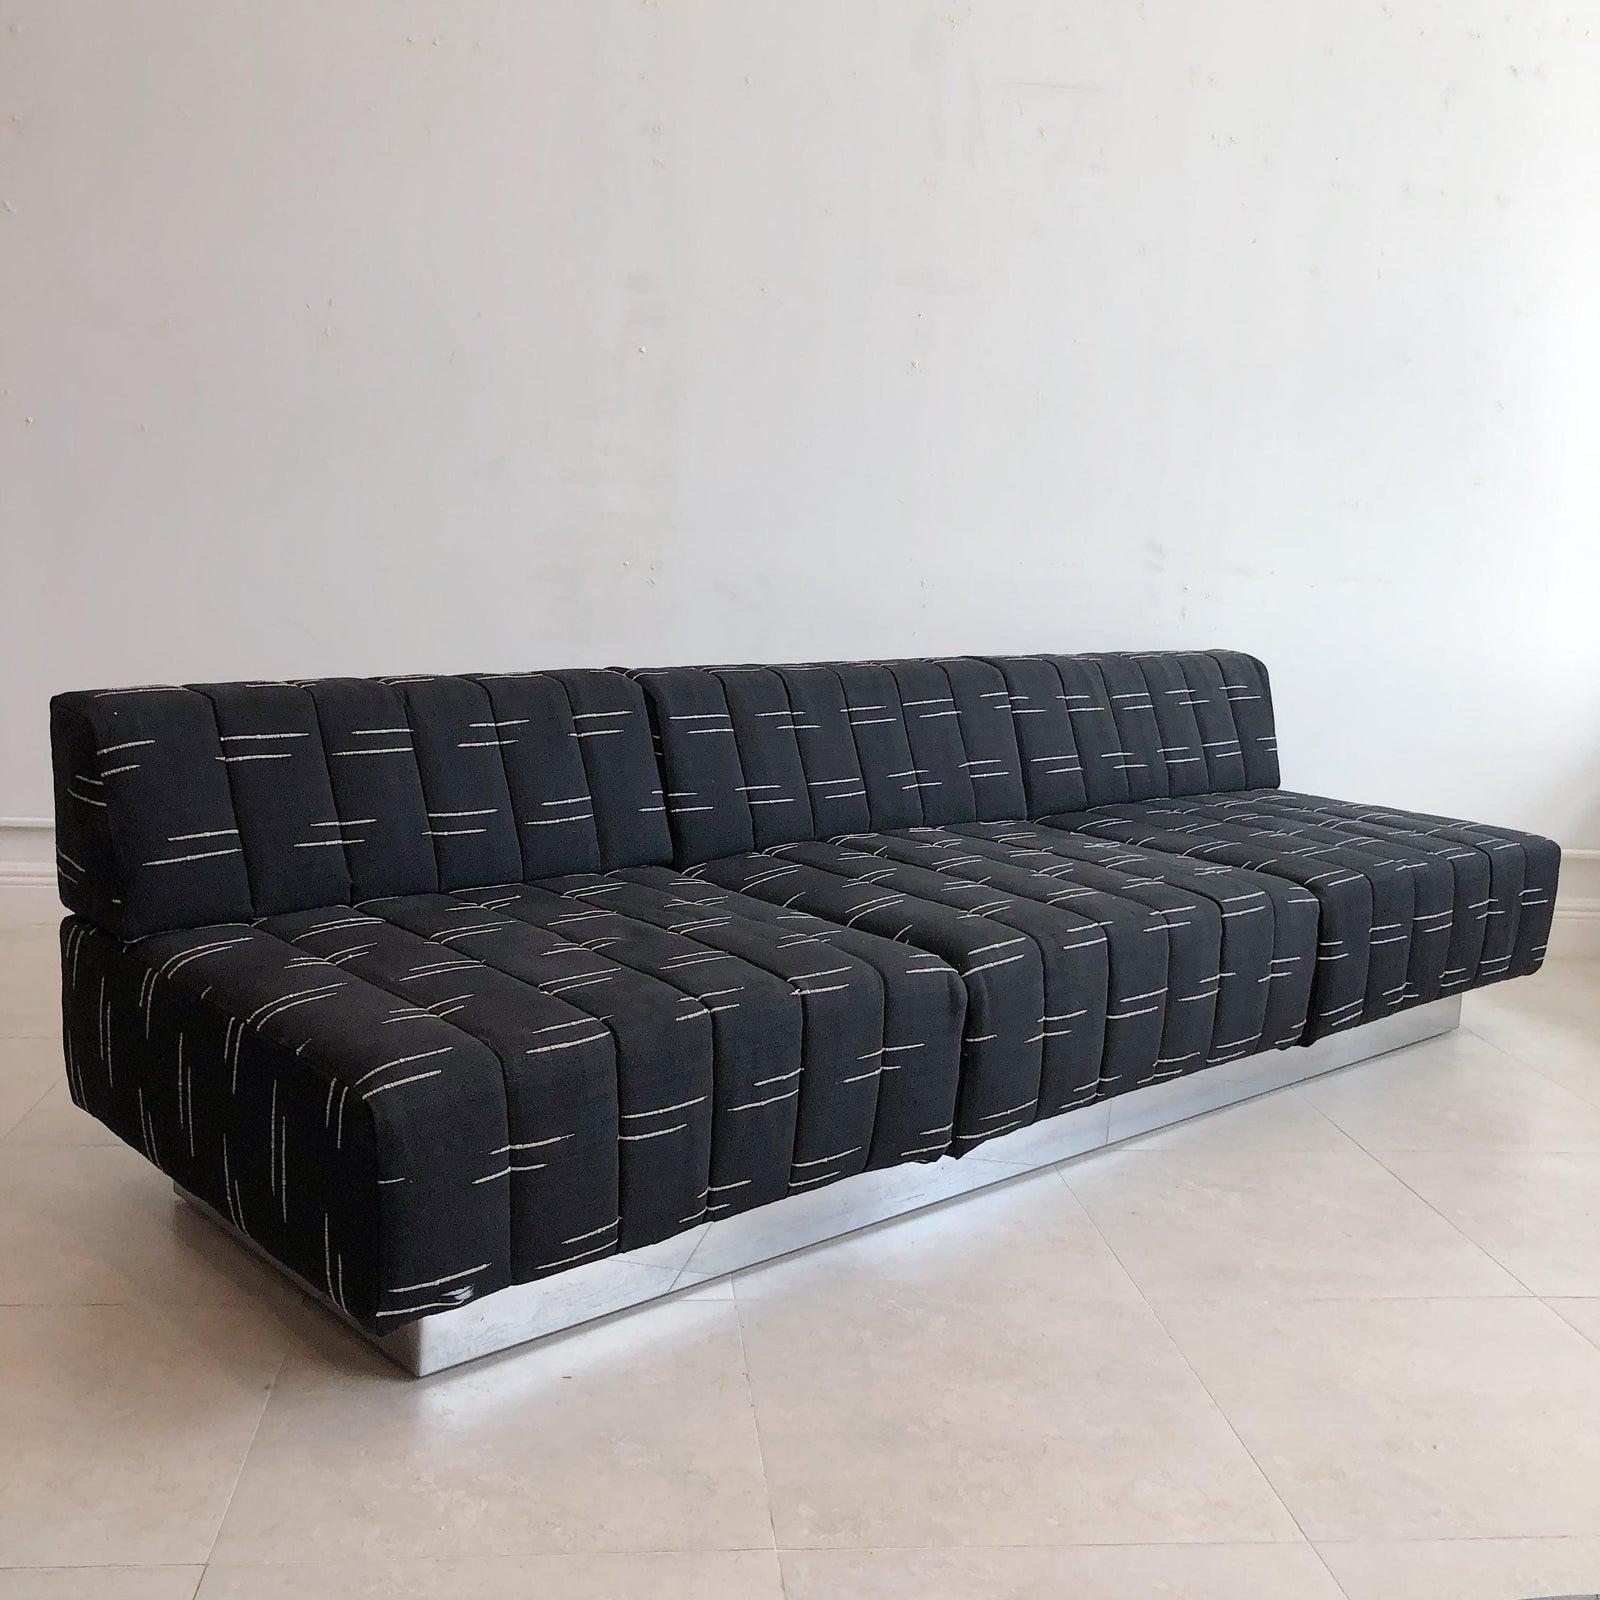 1960's vintage Harvey robber 3 seat sofa with steel over wood plinth base. In original as is fabric.